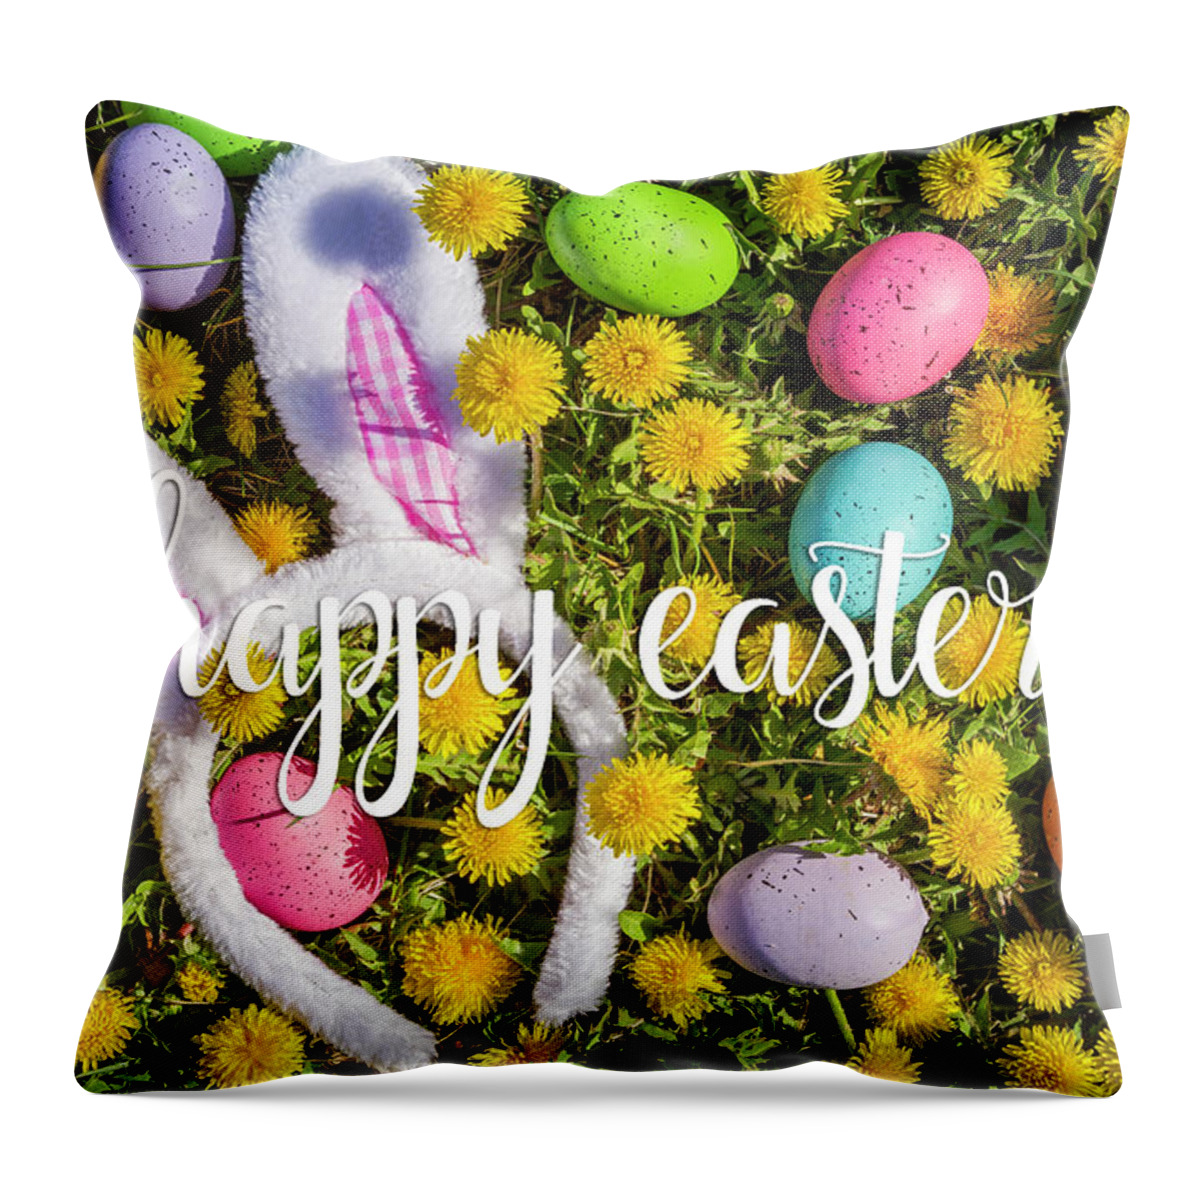 Easter Bunny Throw Pillow featuring the photograph Happy Easter by Teri Virbickis